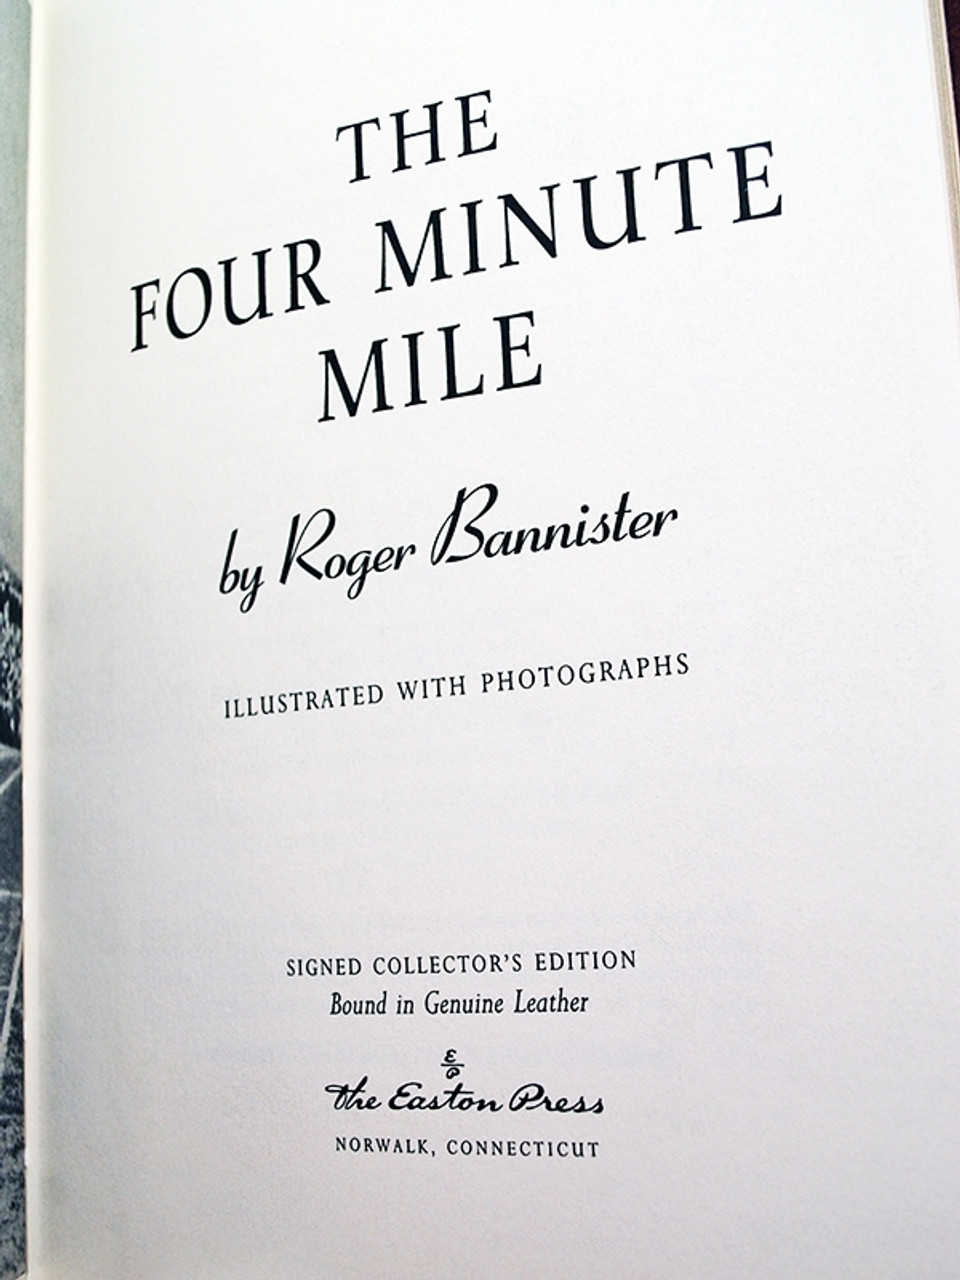 Easton Press, Roger Bannister "The Four Minute Mile" Signed Limited Edition, Leather Bound Collector's Edition w/COA